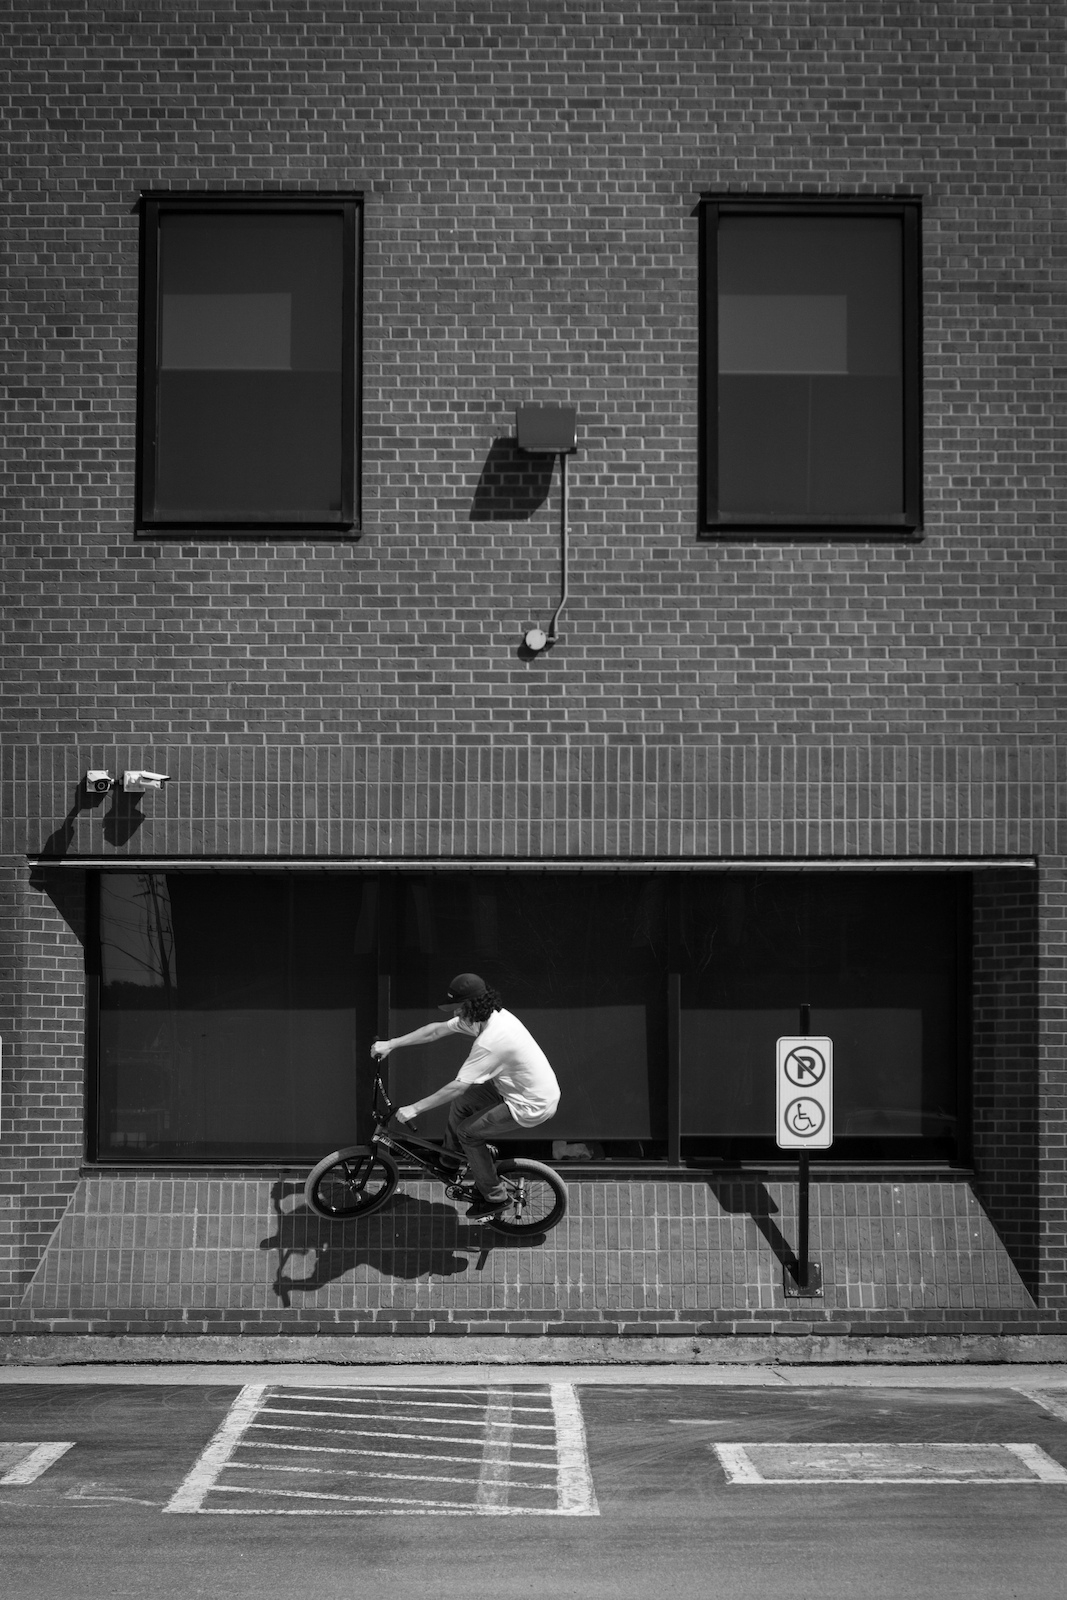 Wallride in a mouth of a face-like wall


/www.facebook.com/grahamhowephotos